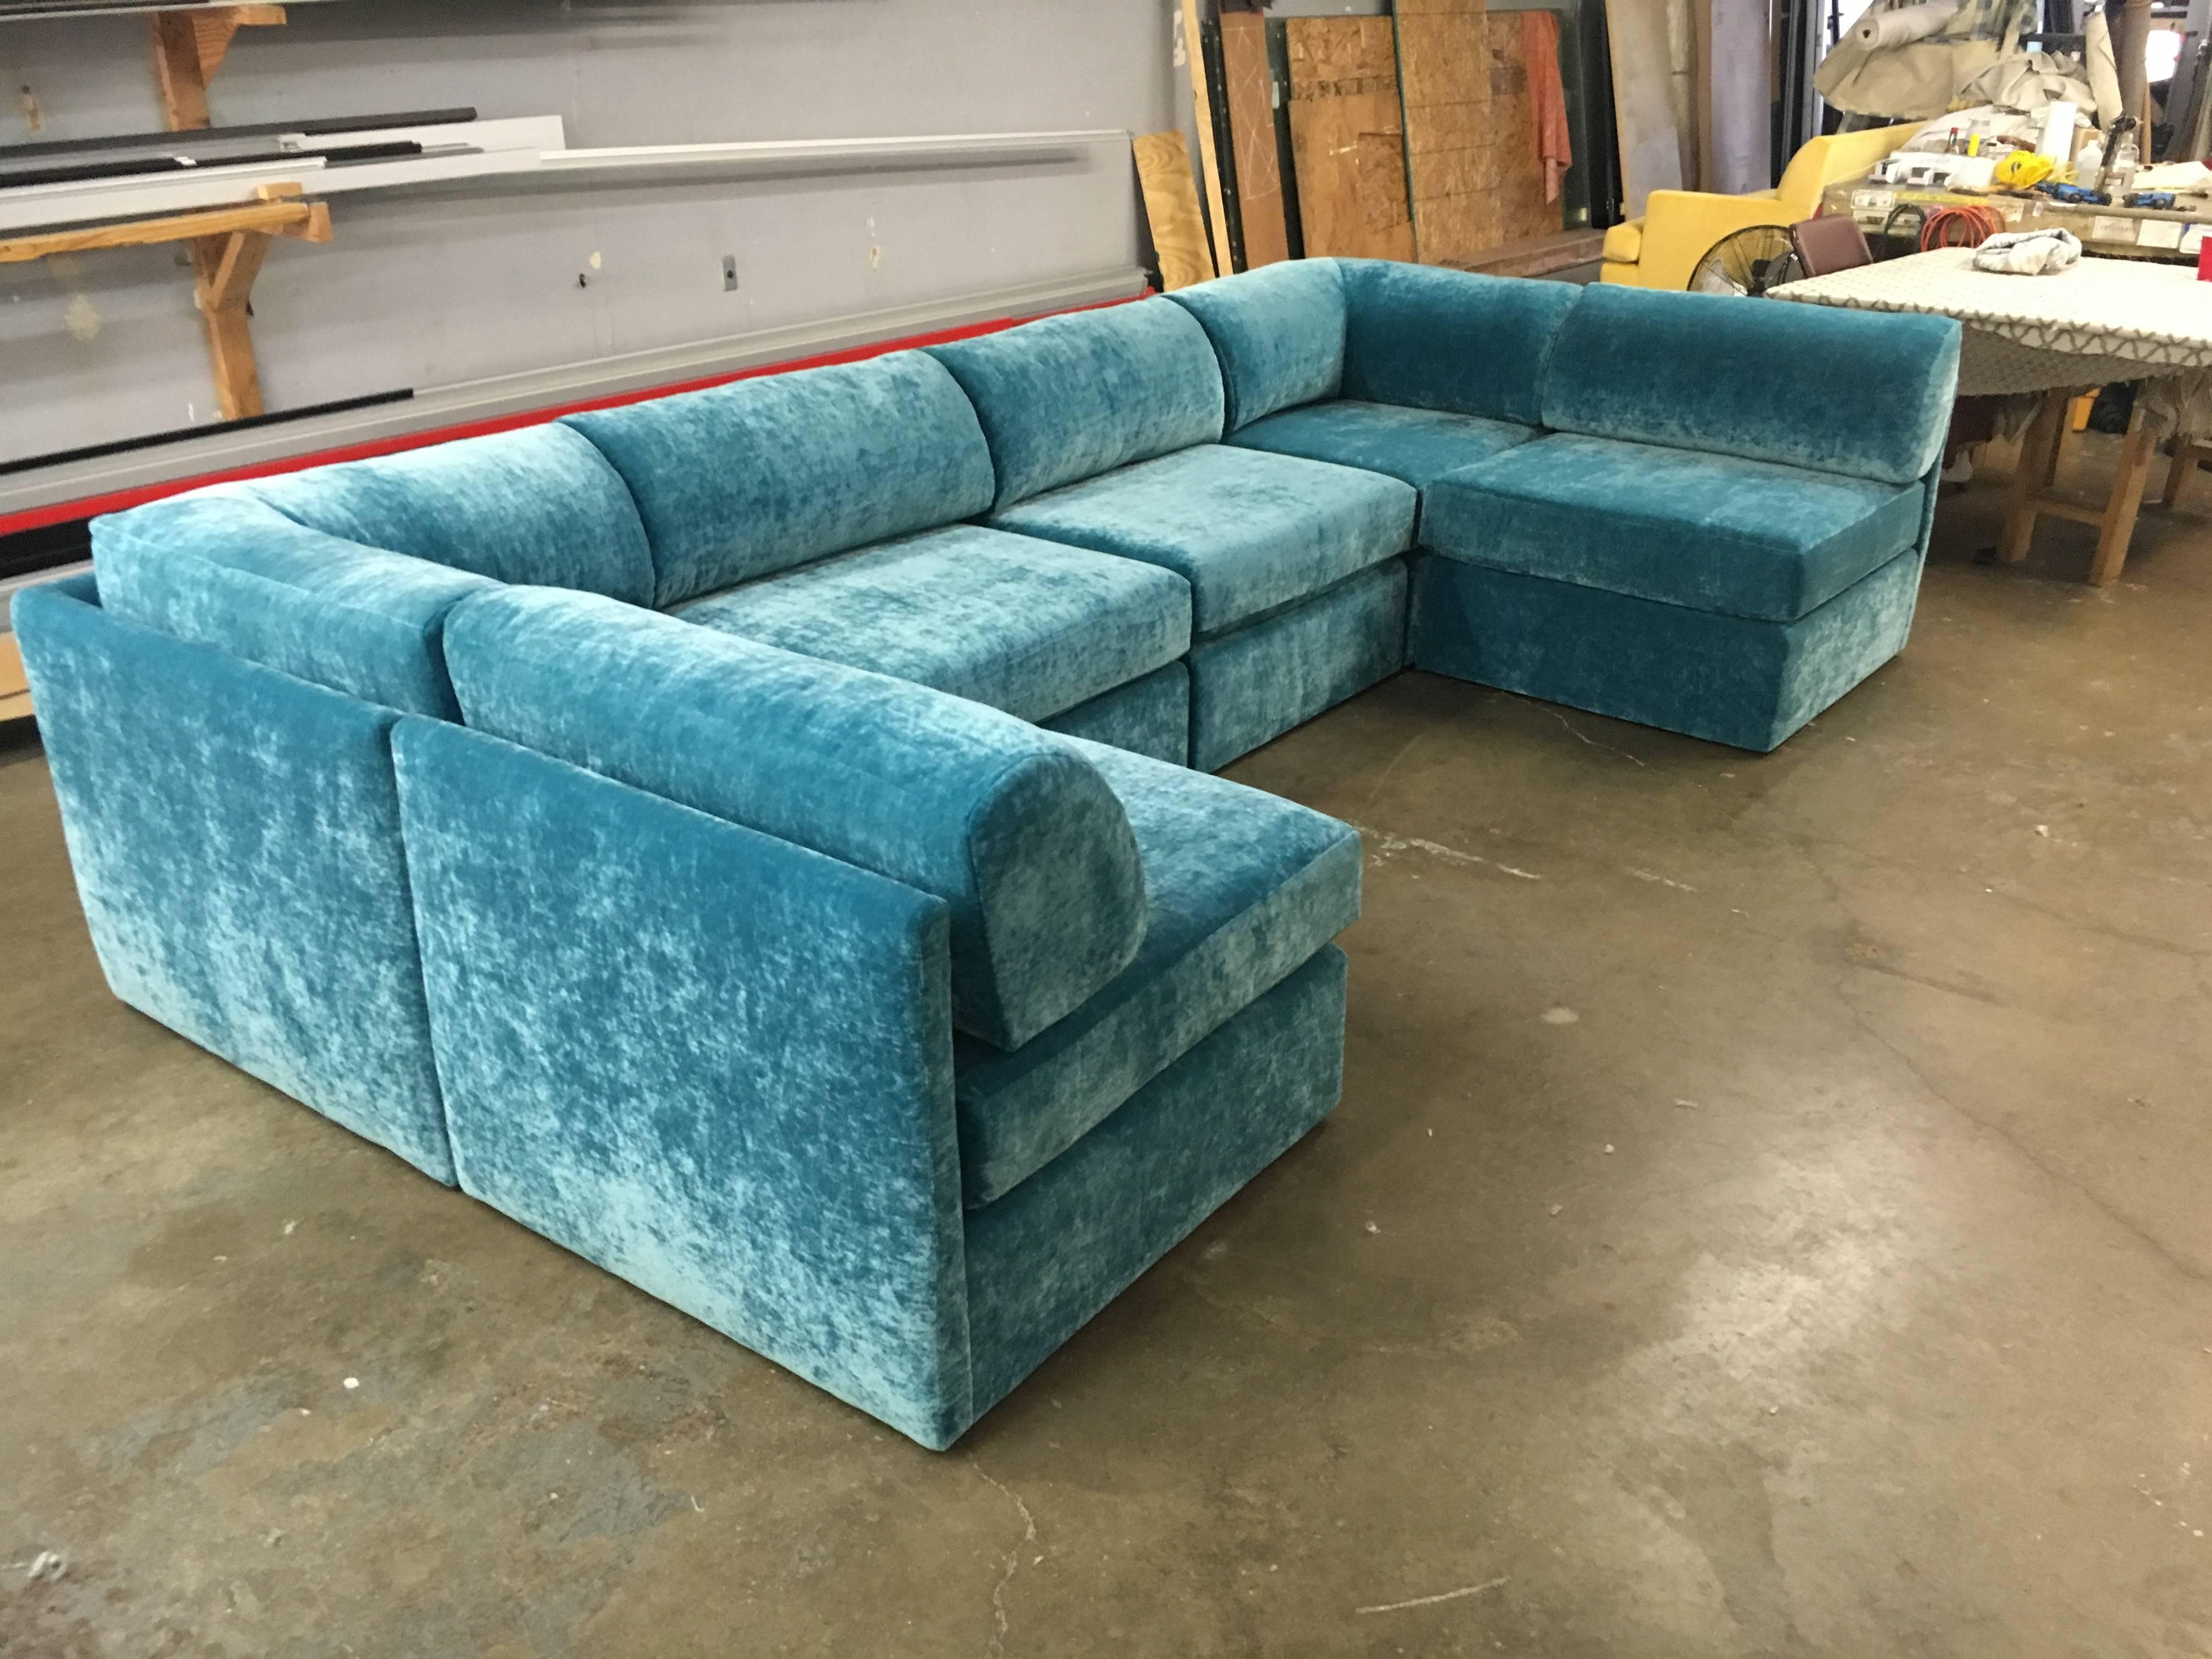 Multiple configurations available. Seven-piece sectional by Milo Baughman for Thayer Coggin. Upholstery is in OK condition, no rips or tears. But these look great redone in an up to date fabric. We attached of photo of an identical sofa that we